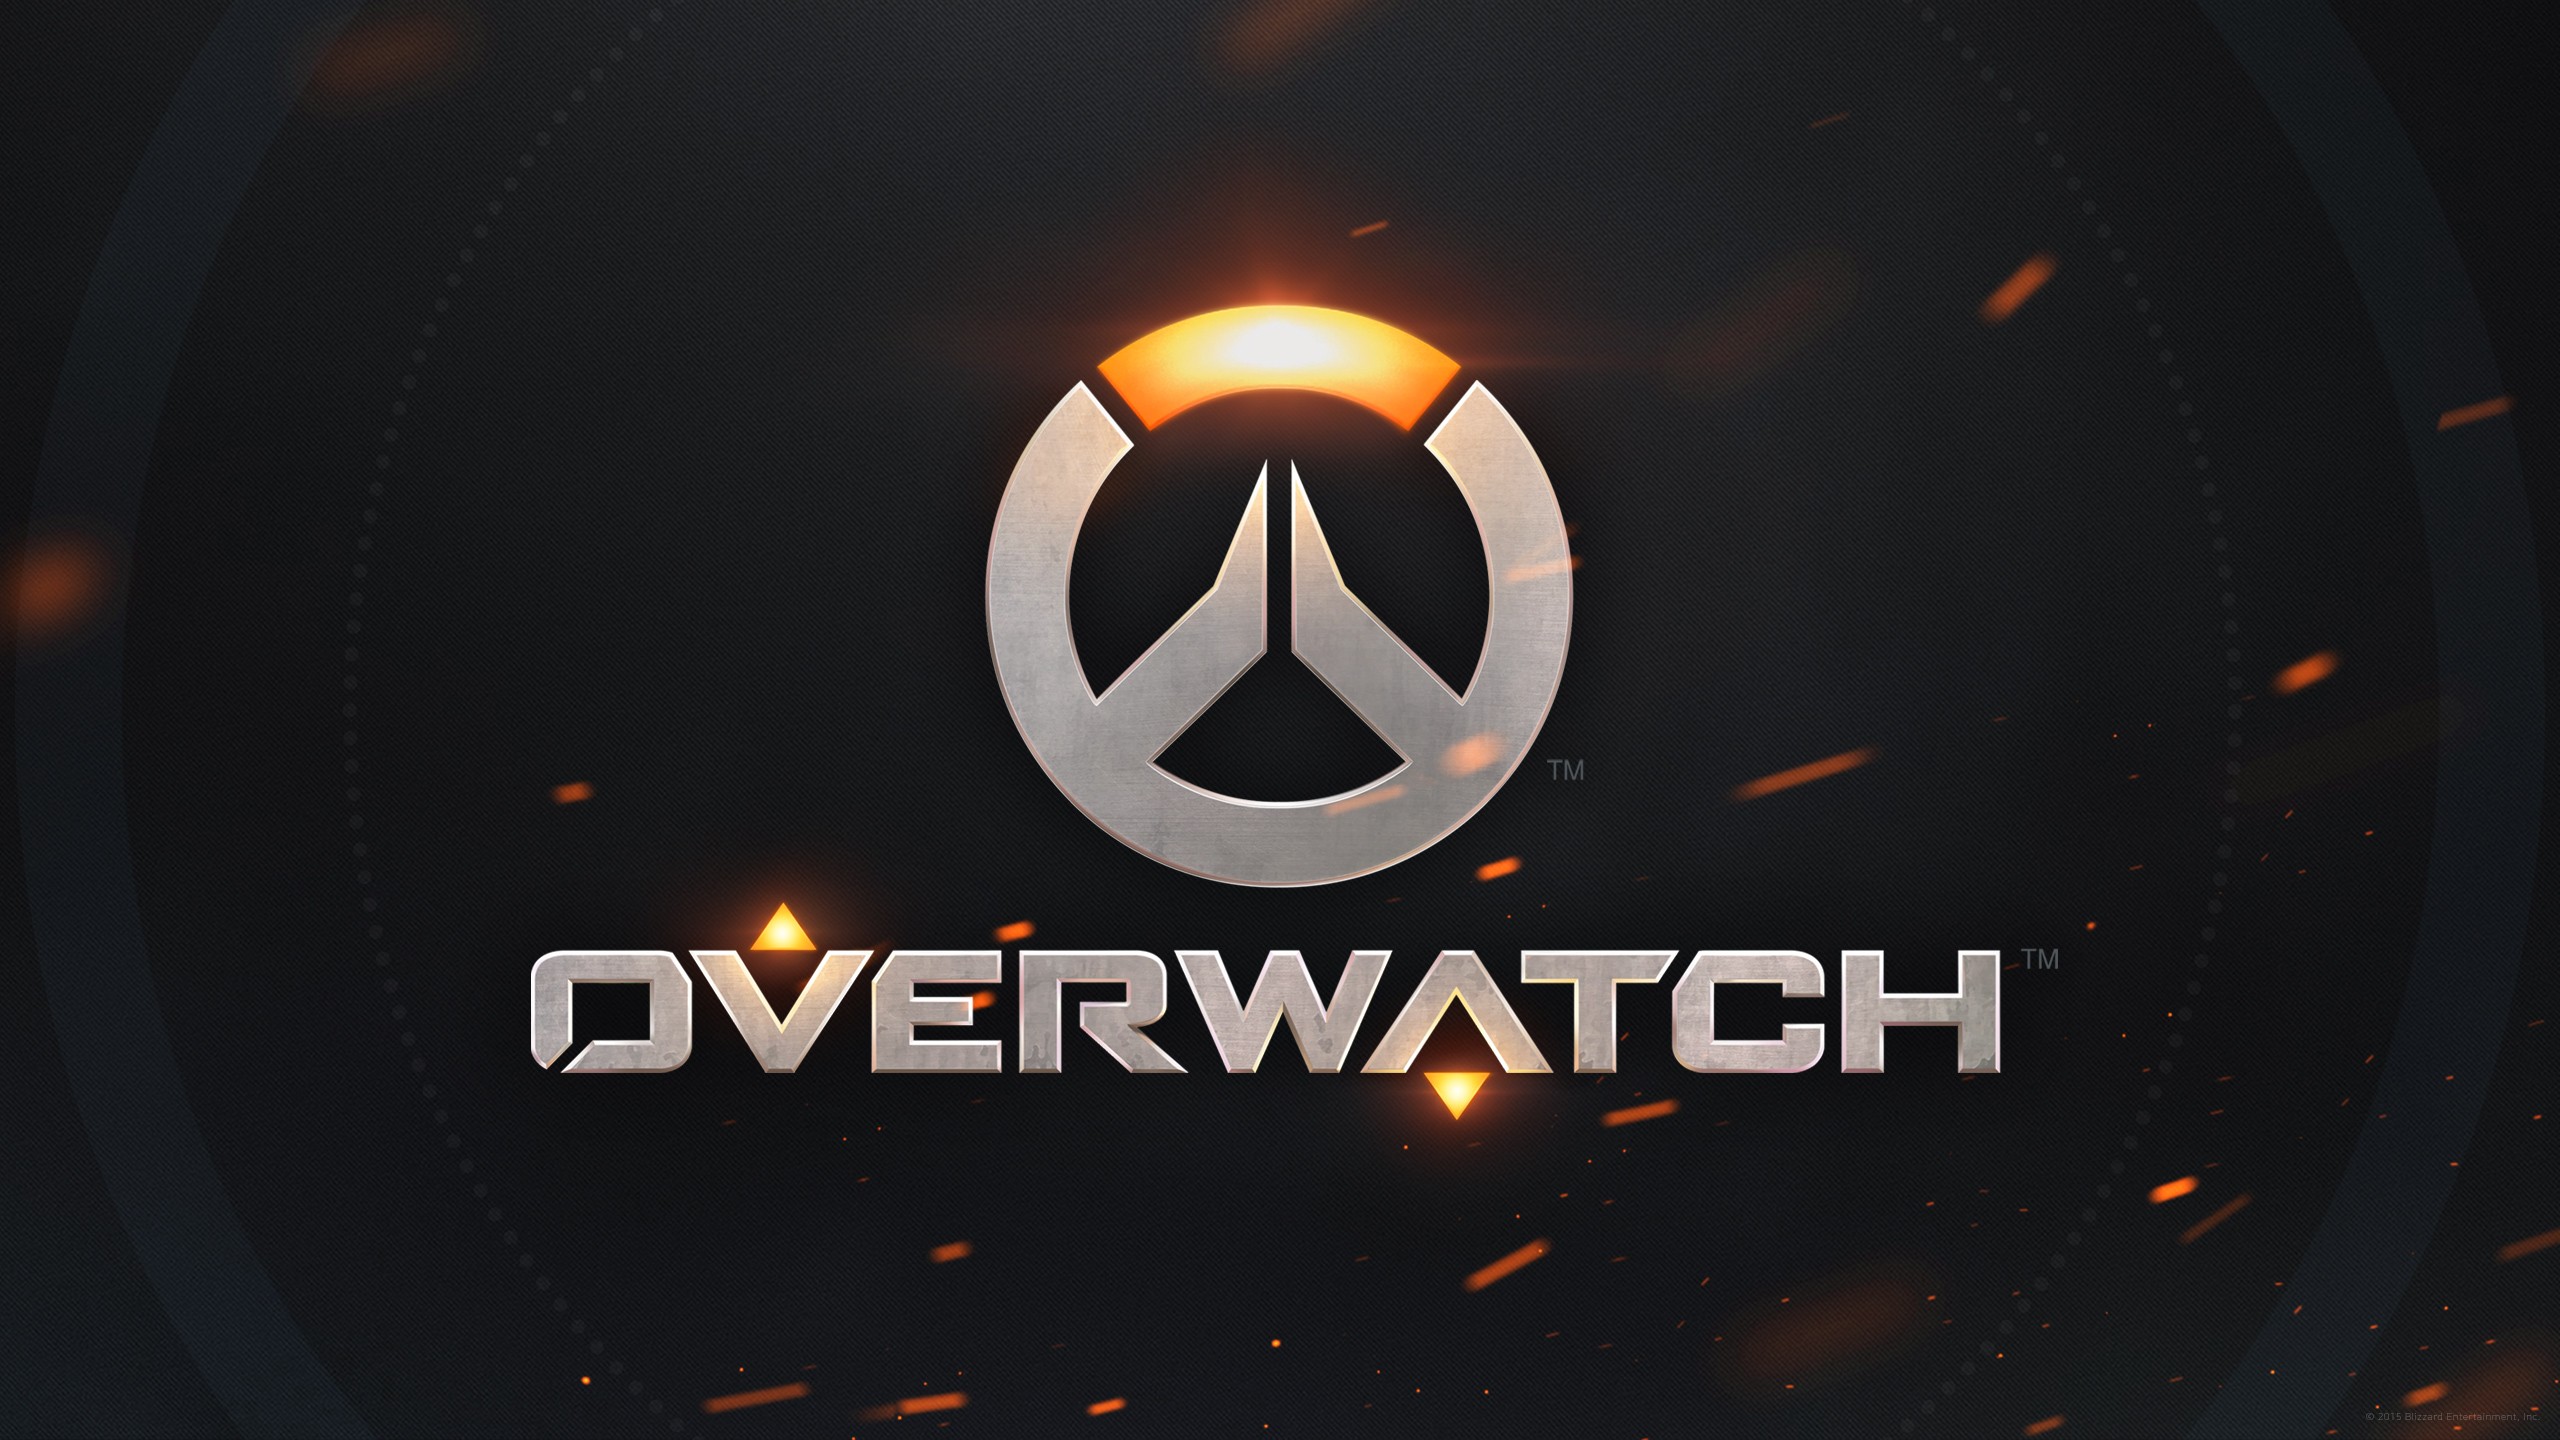 General 2560x1440 Blizzard Entertainment Overwatch logo video games PC gaming